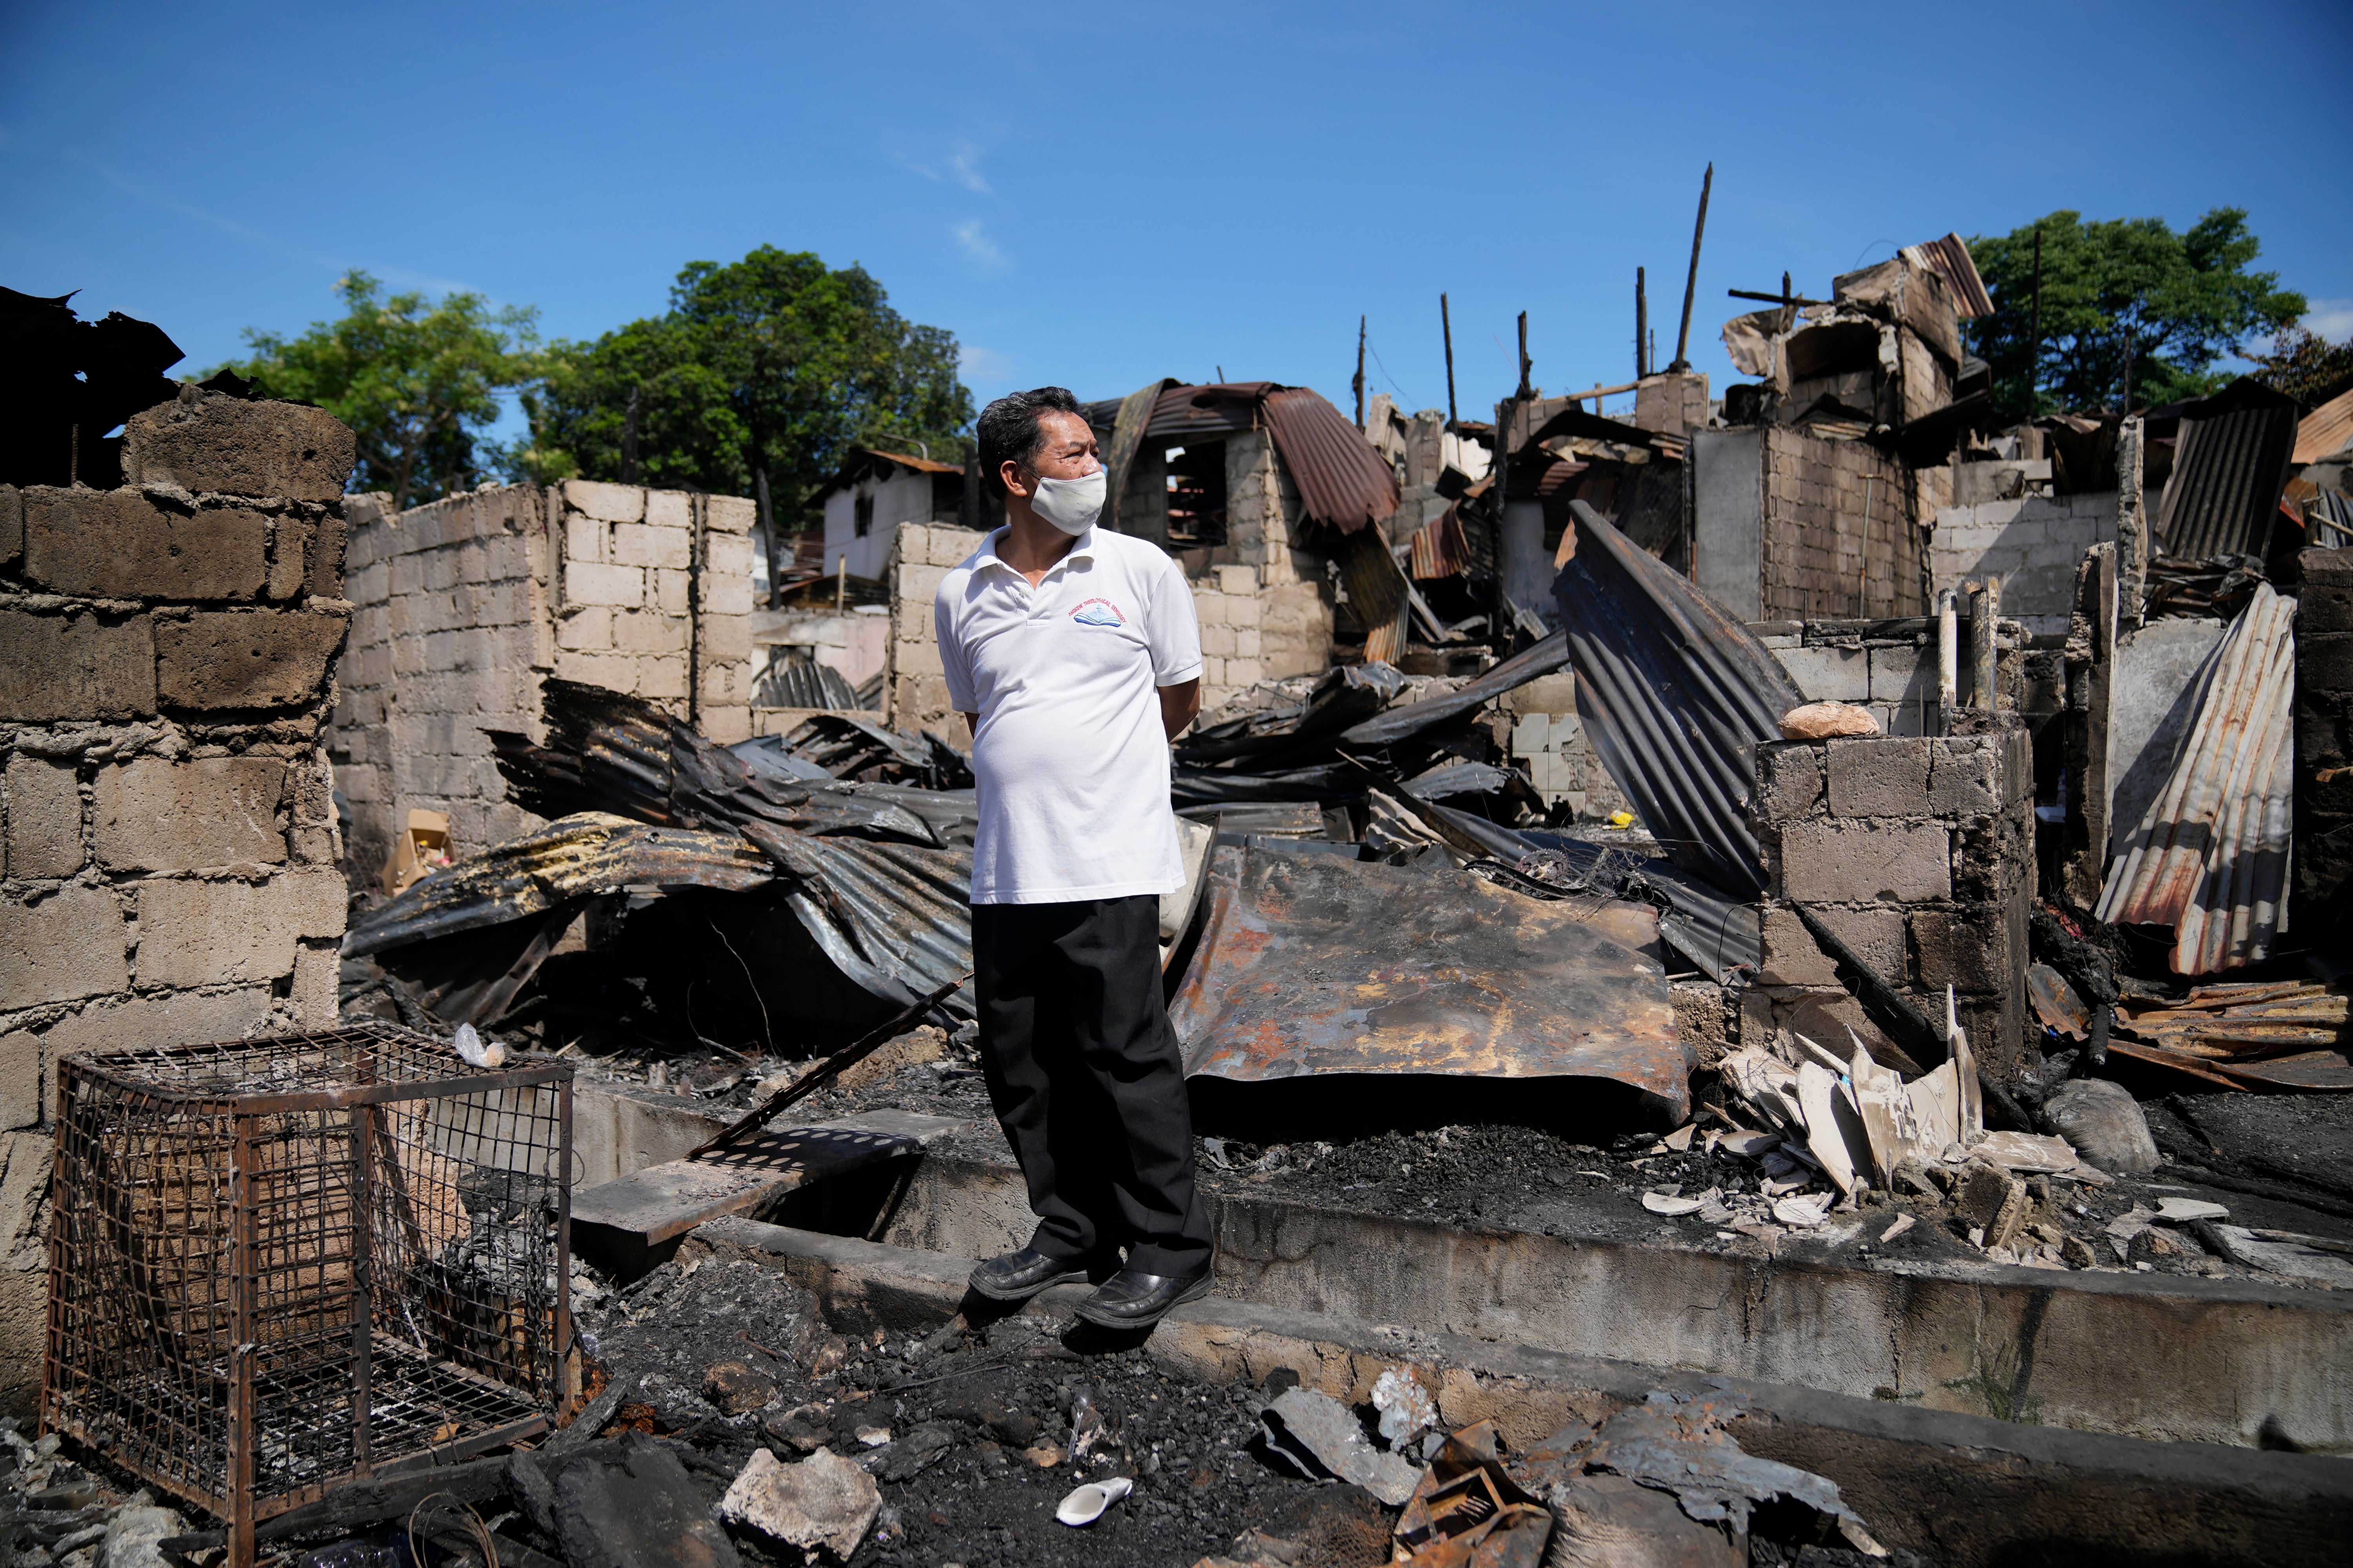 A man stands beside remains of homes after a fire gutted a residential area in Quezon city, Philippines on Monday